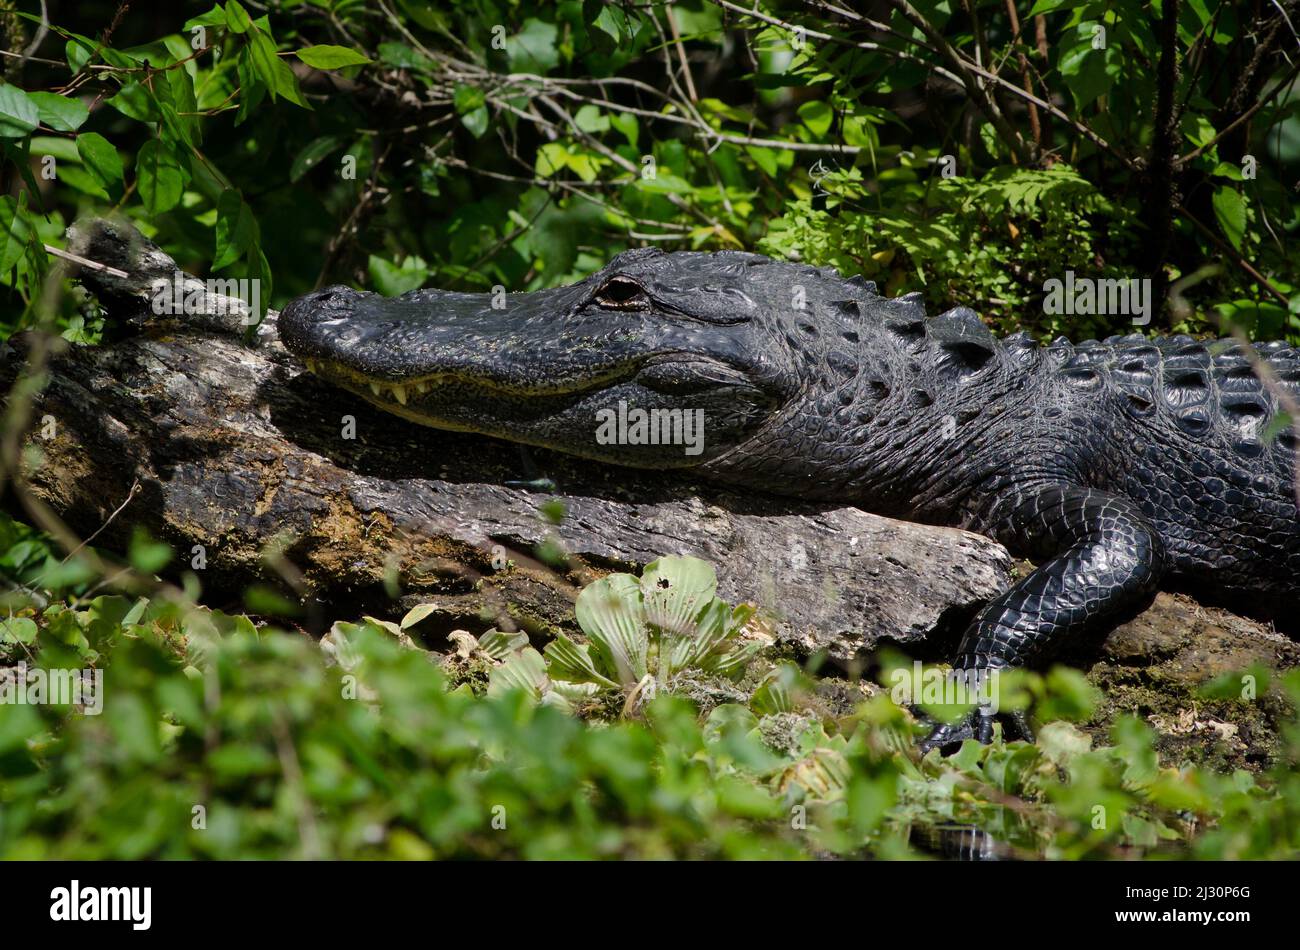 A close up of an American Alligator sunning on a log in Silver Springs State Park, Florida, USA Stock Photo